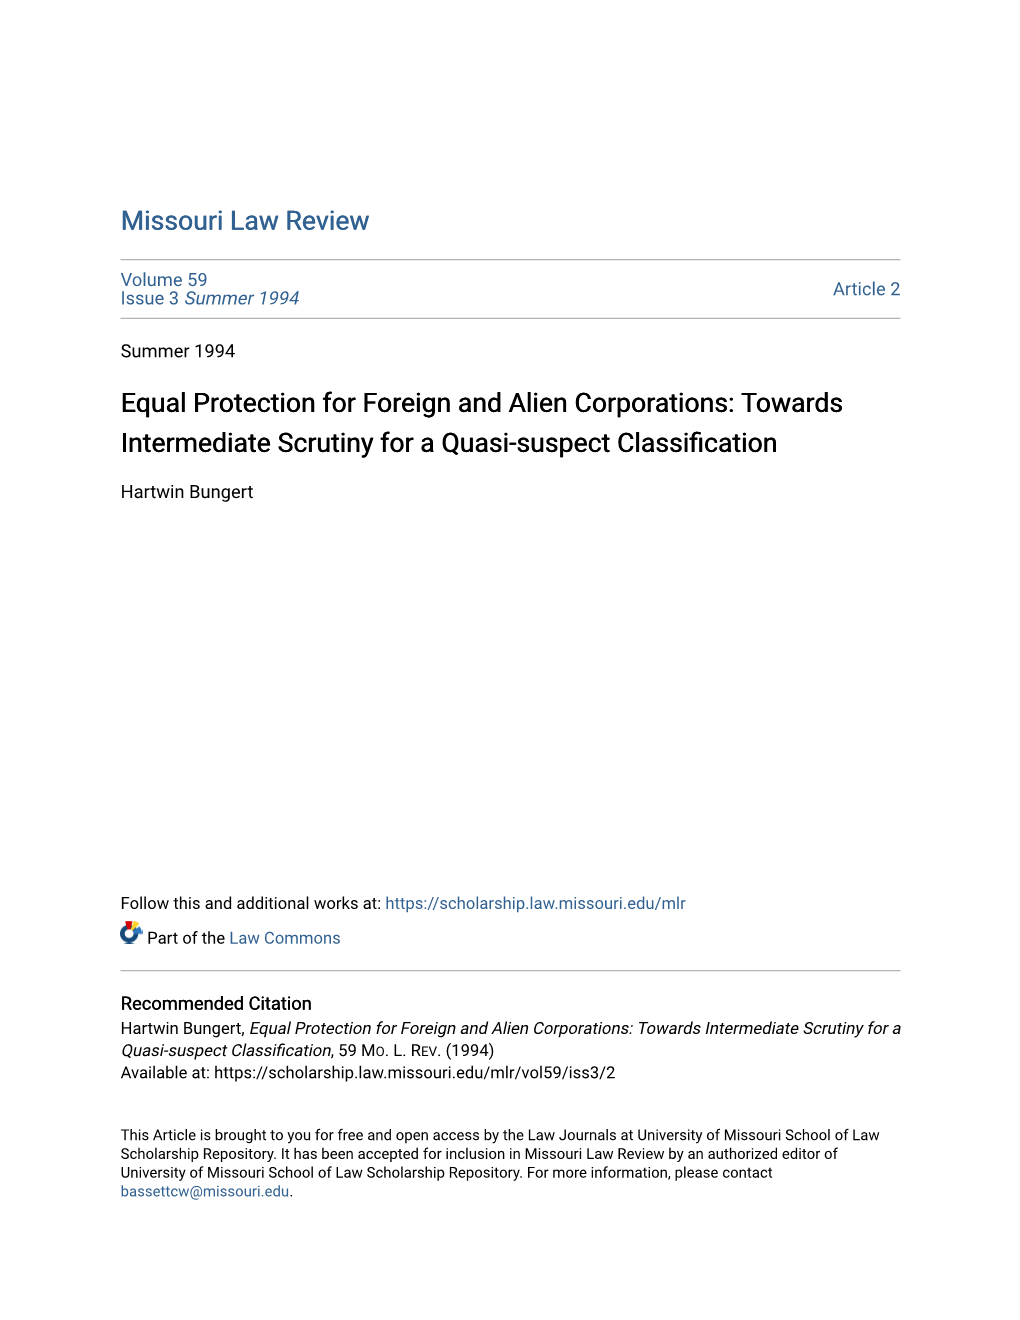 Equal Protection for Foreign and Alien Corporations: Towards Intermediate Scrutiny for a Quasi-Suspect Classification